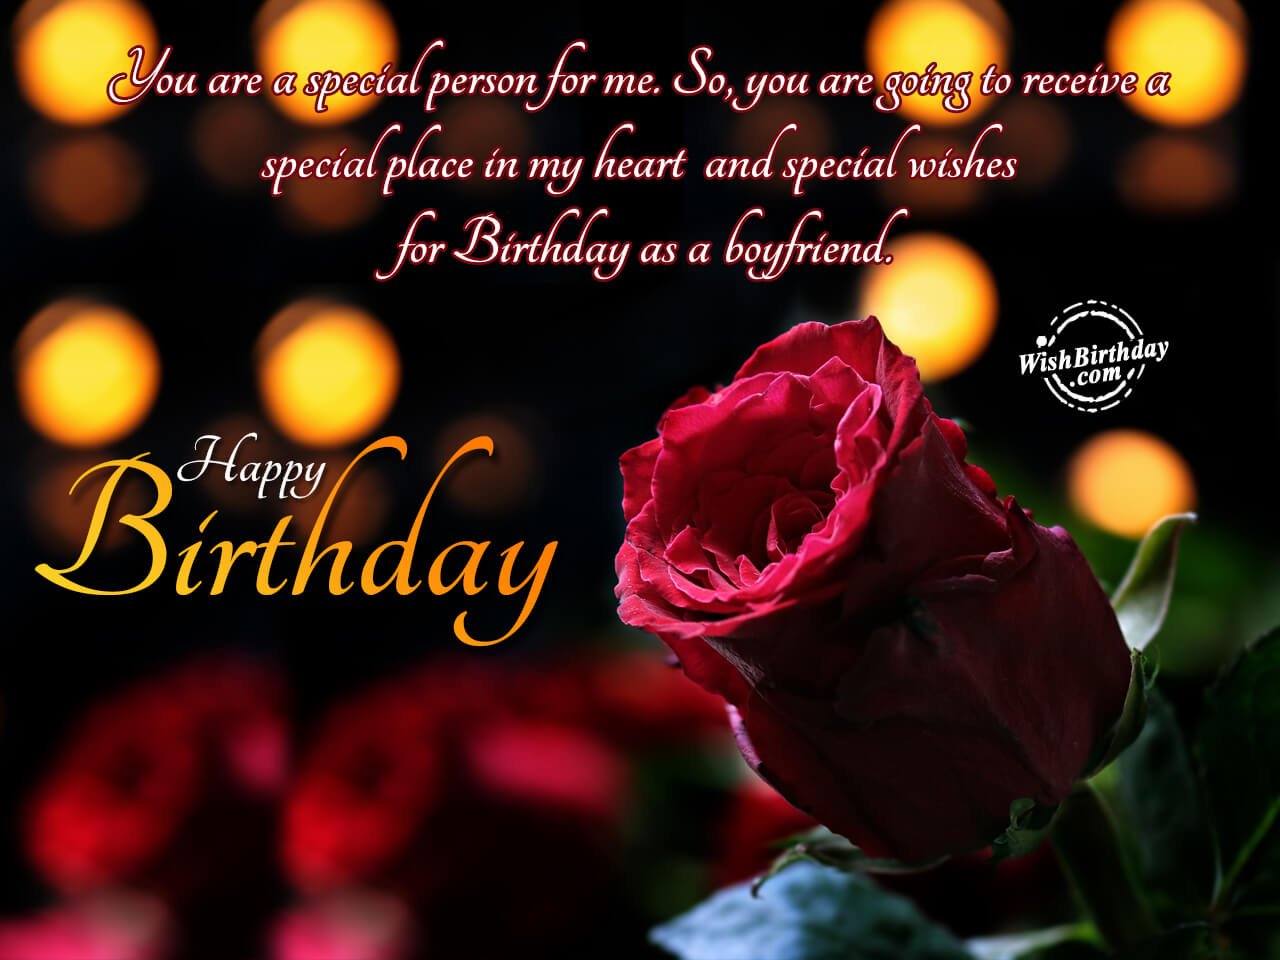 you-are-a-special-person-for-me-happy-birthday-birthday-wishes